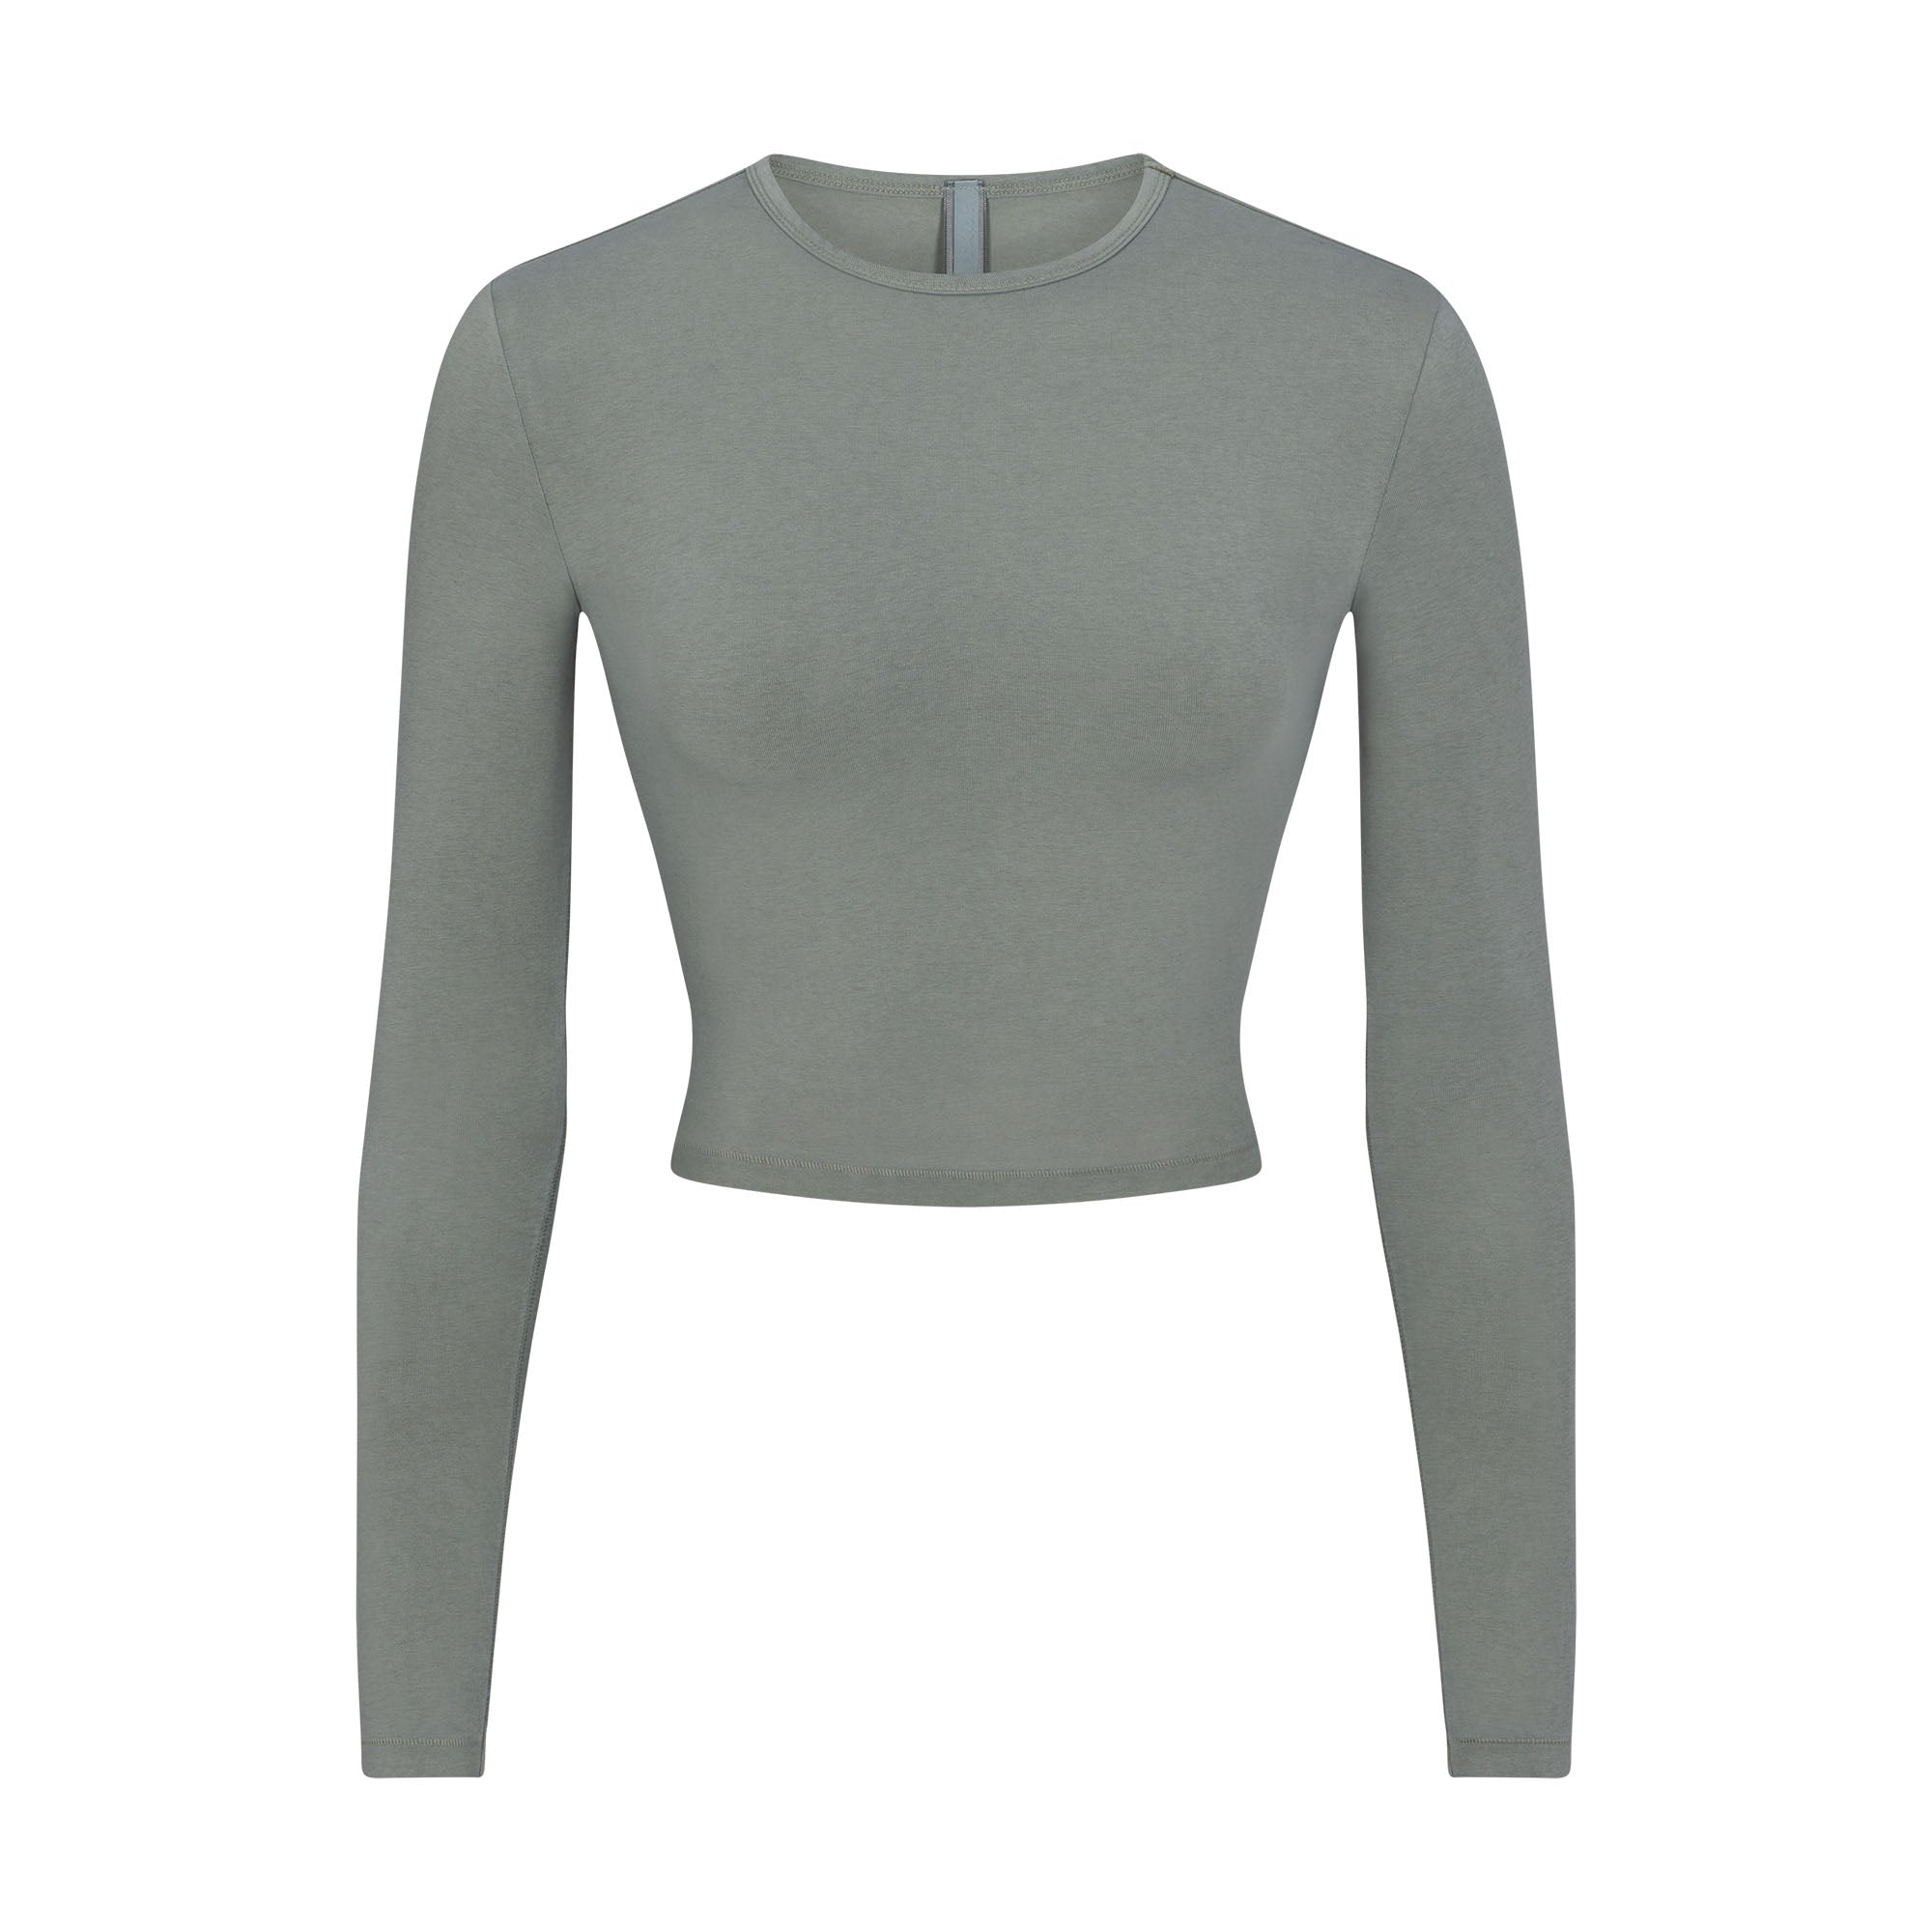 NEW VINTAGE CROPPED LONG SLEEVE T-SHIRT | BLUE CHALK - NEW VINTAGE ...